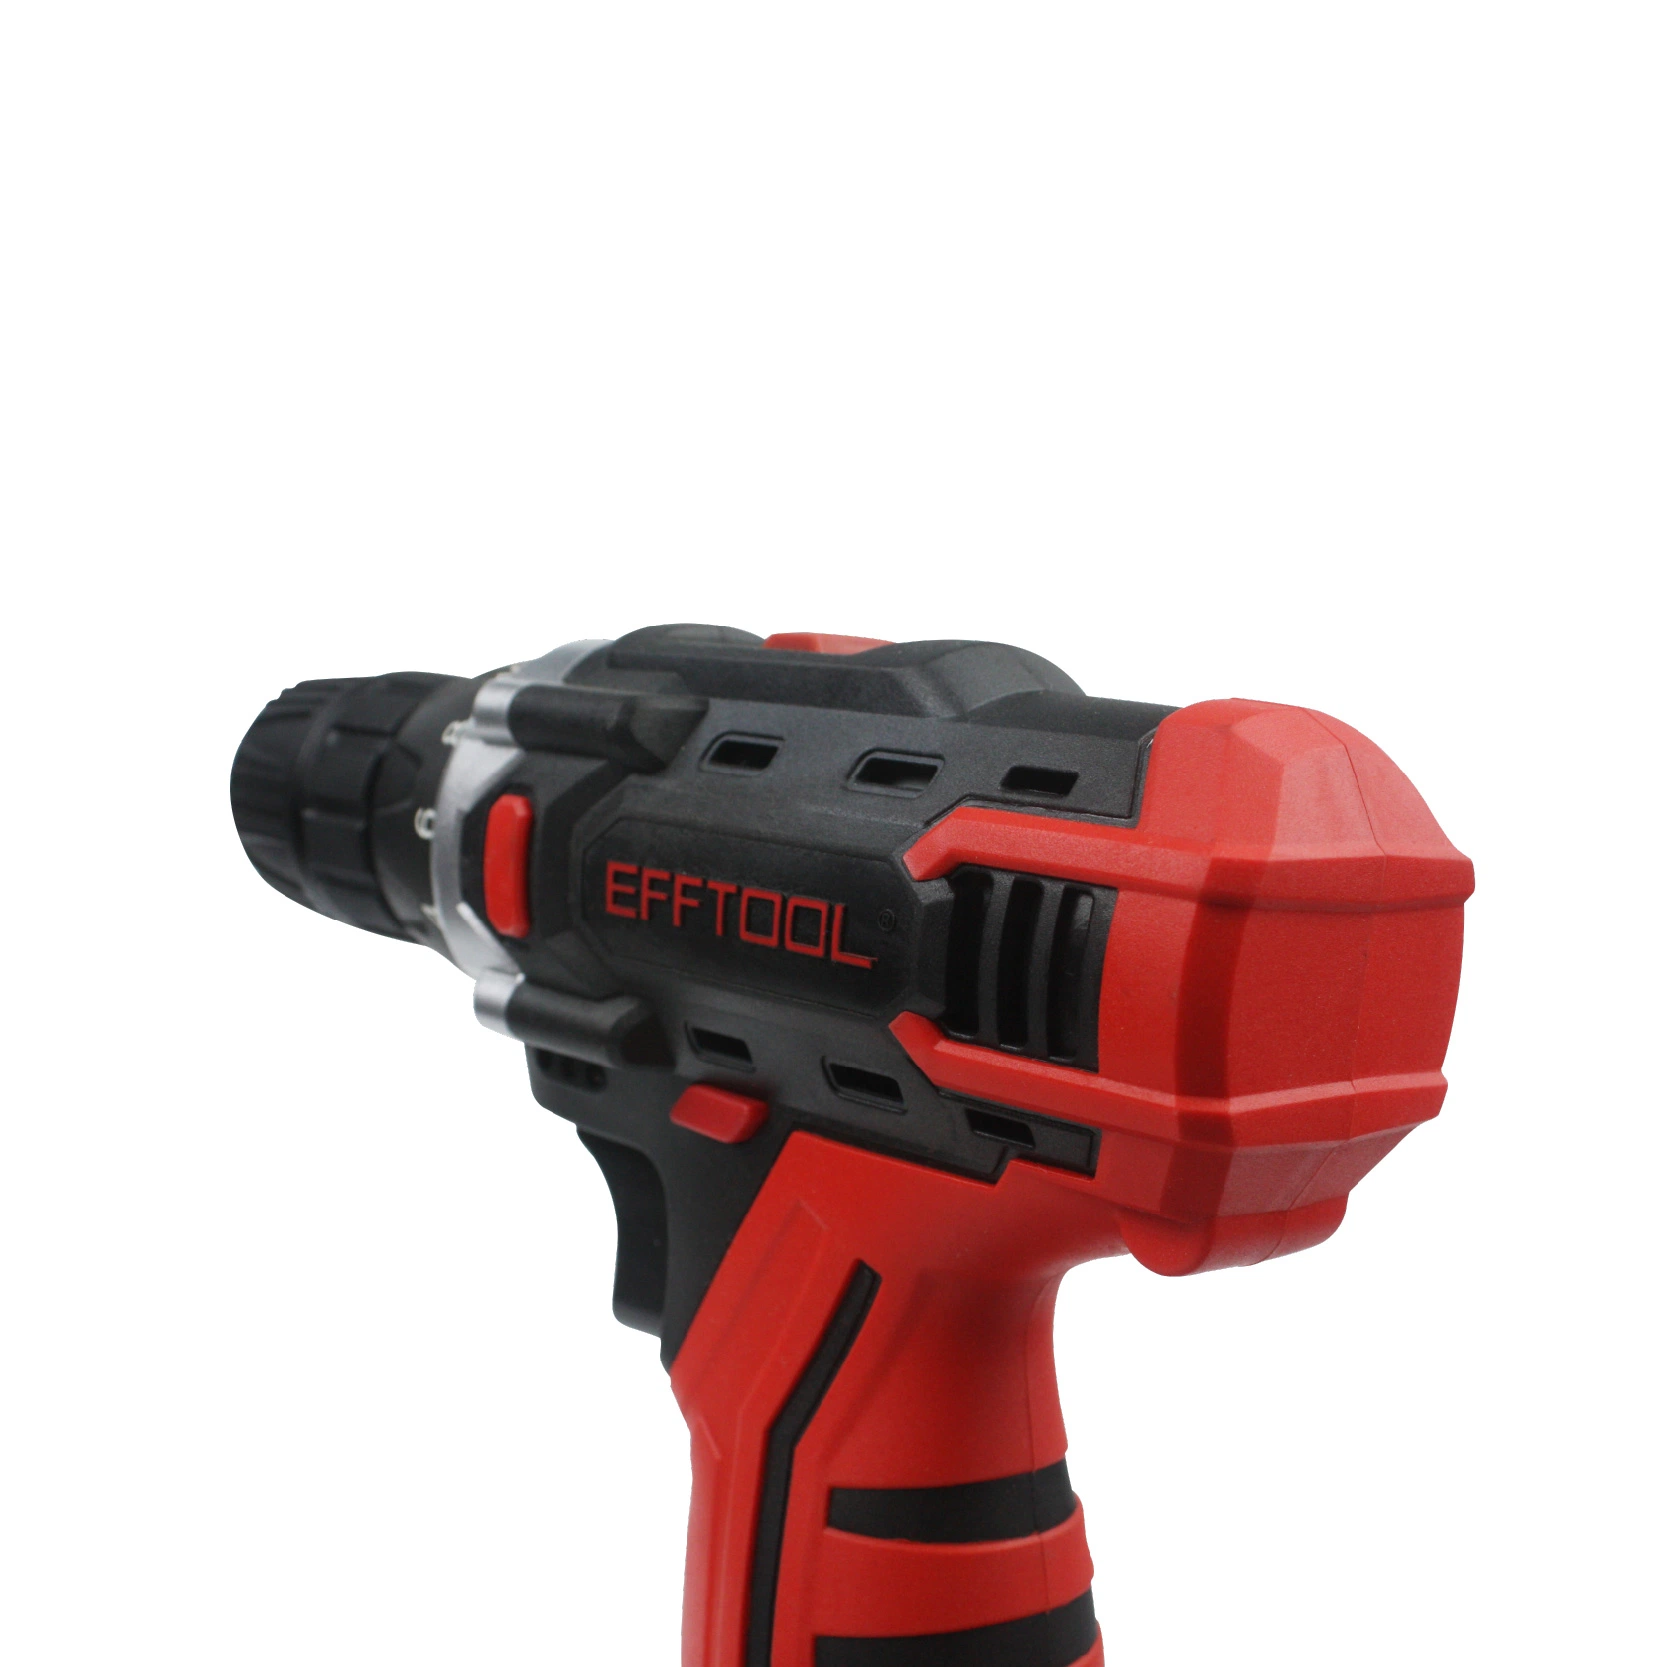 Efftool Lithium Battery Electric Drill Screwdriver Rechargeable Cordless Drill Power Tool Hand Drill